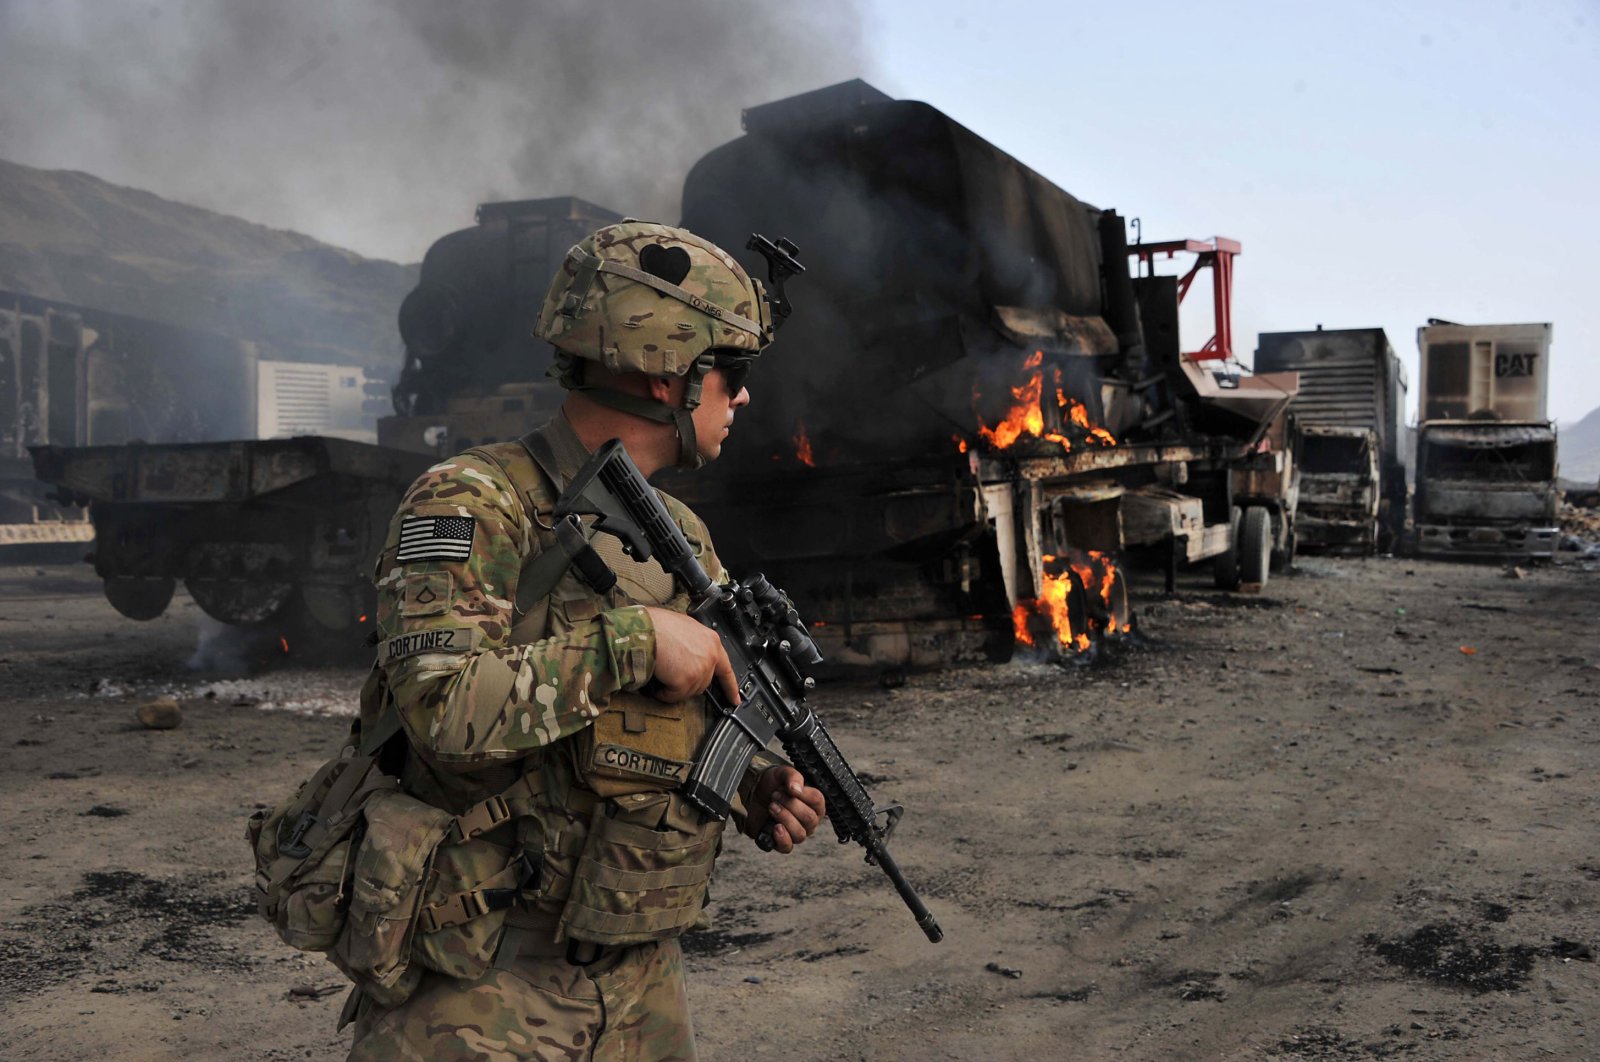 A U.S. soldier investigates the scene of a suicide attack at the Afghan-Pakistan border crossing in Torkham, Nangarhar province, June 19, 2014. (AFP Photo)